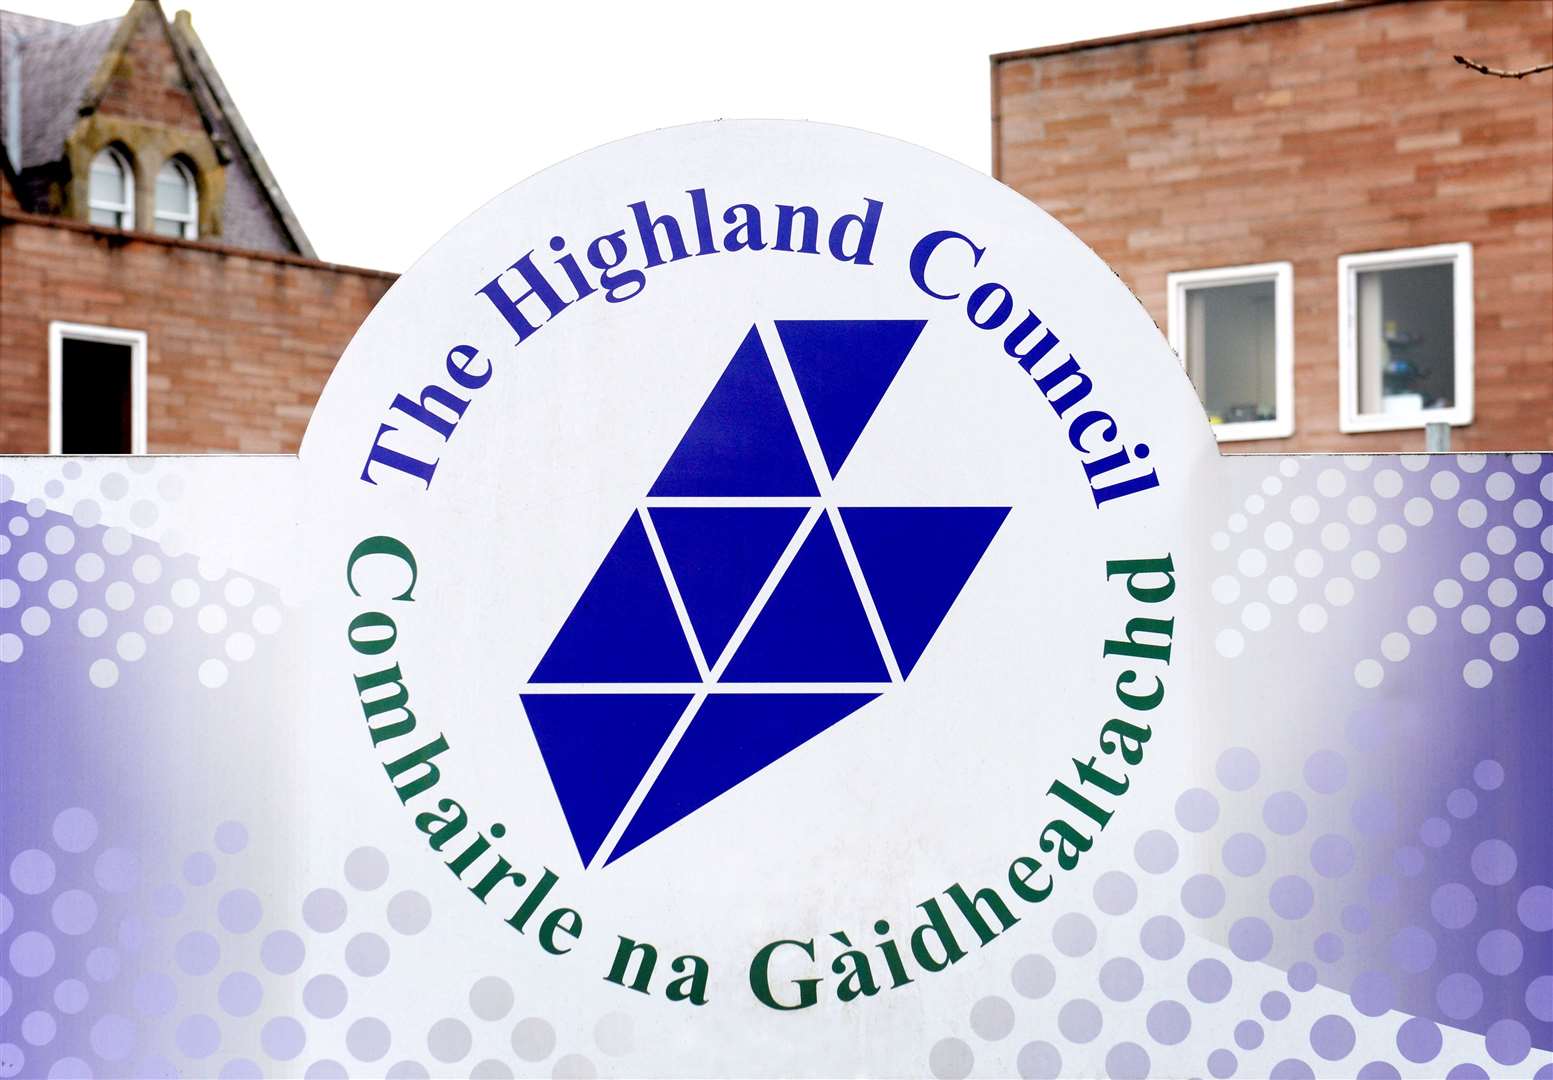 Highland Council is joining the campaign against rogue traders and doorstep scams.